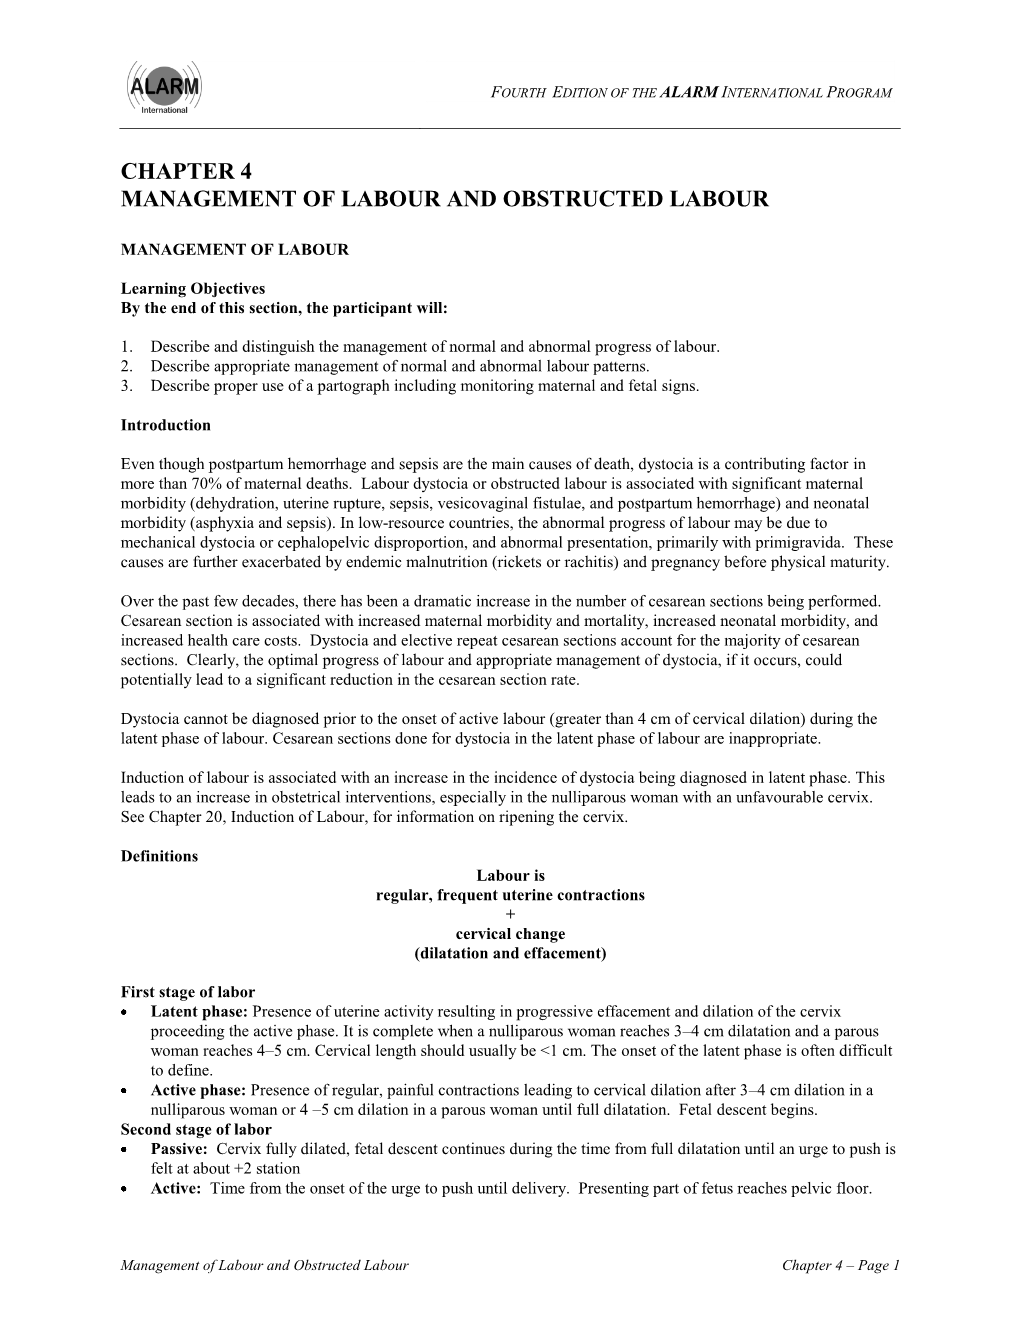 Management of Labour and Obstructed Labour